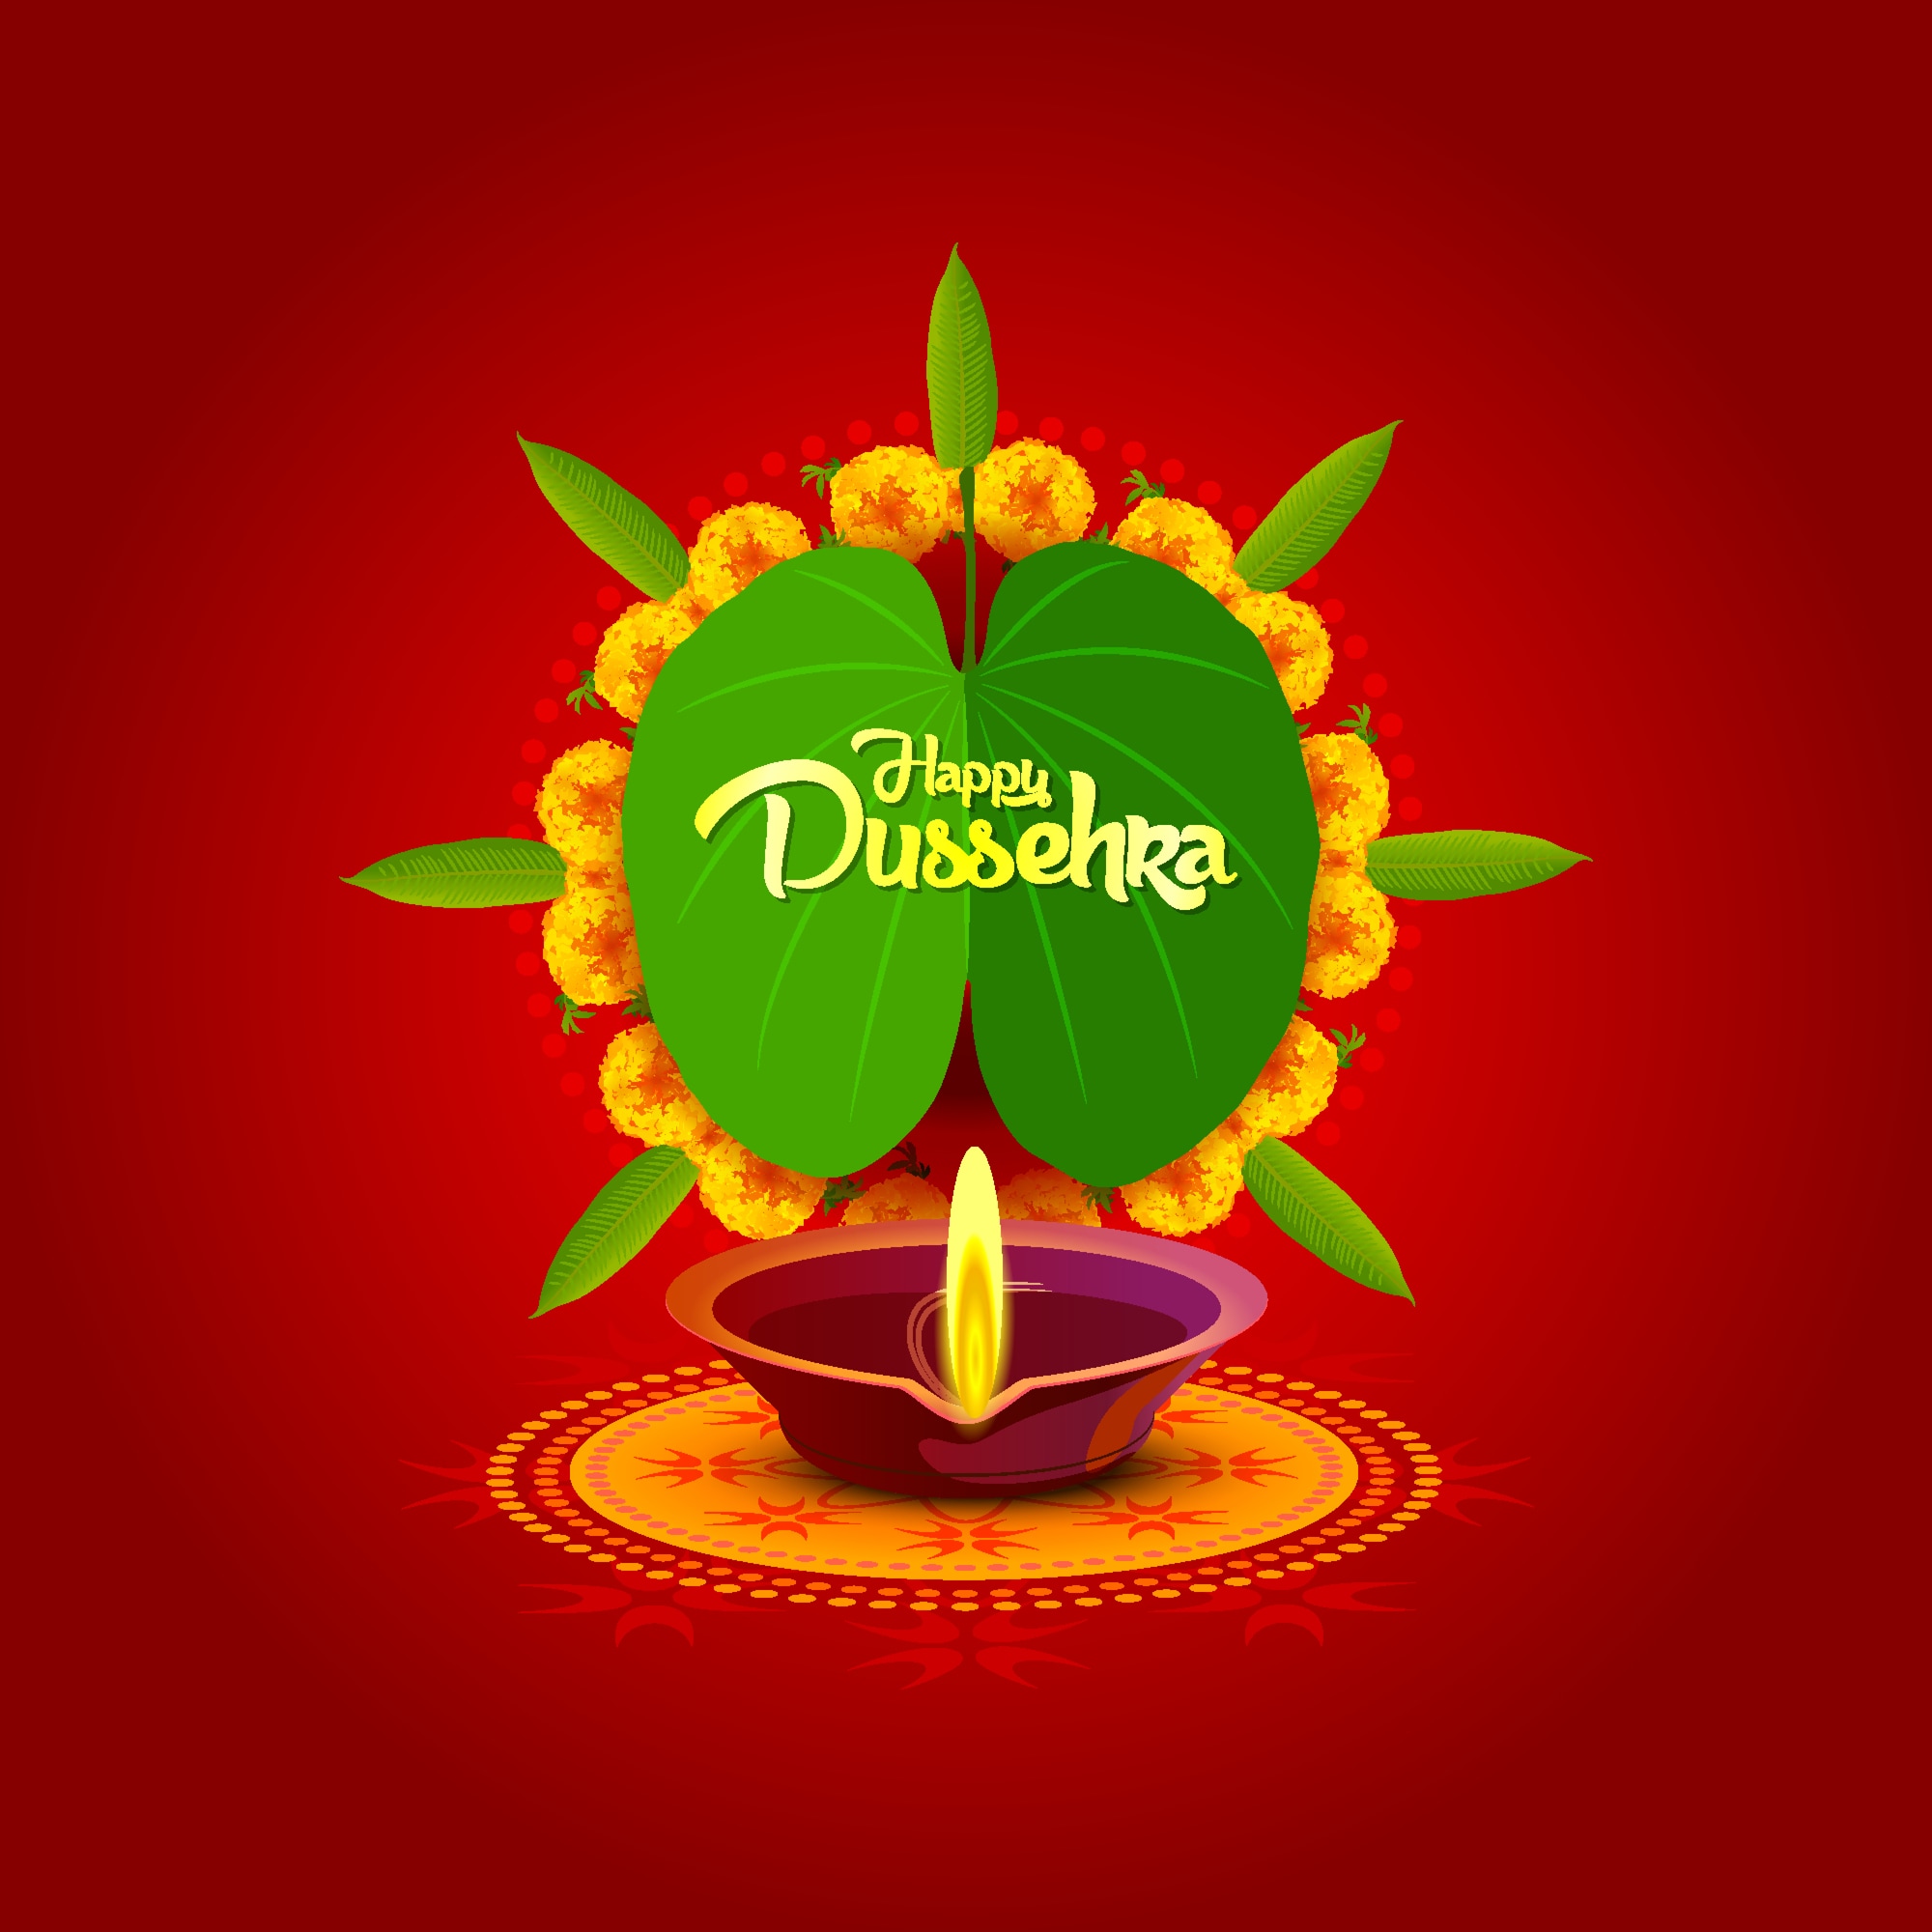 Happy Dussehra 2022 Wallpaper, Wish Images, Quotes, Status, Pics, Photos, SMS and Messages to share.  (Image: Shutterstock) 